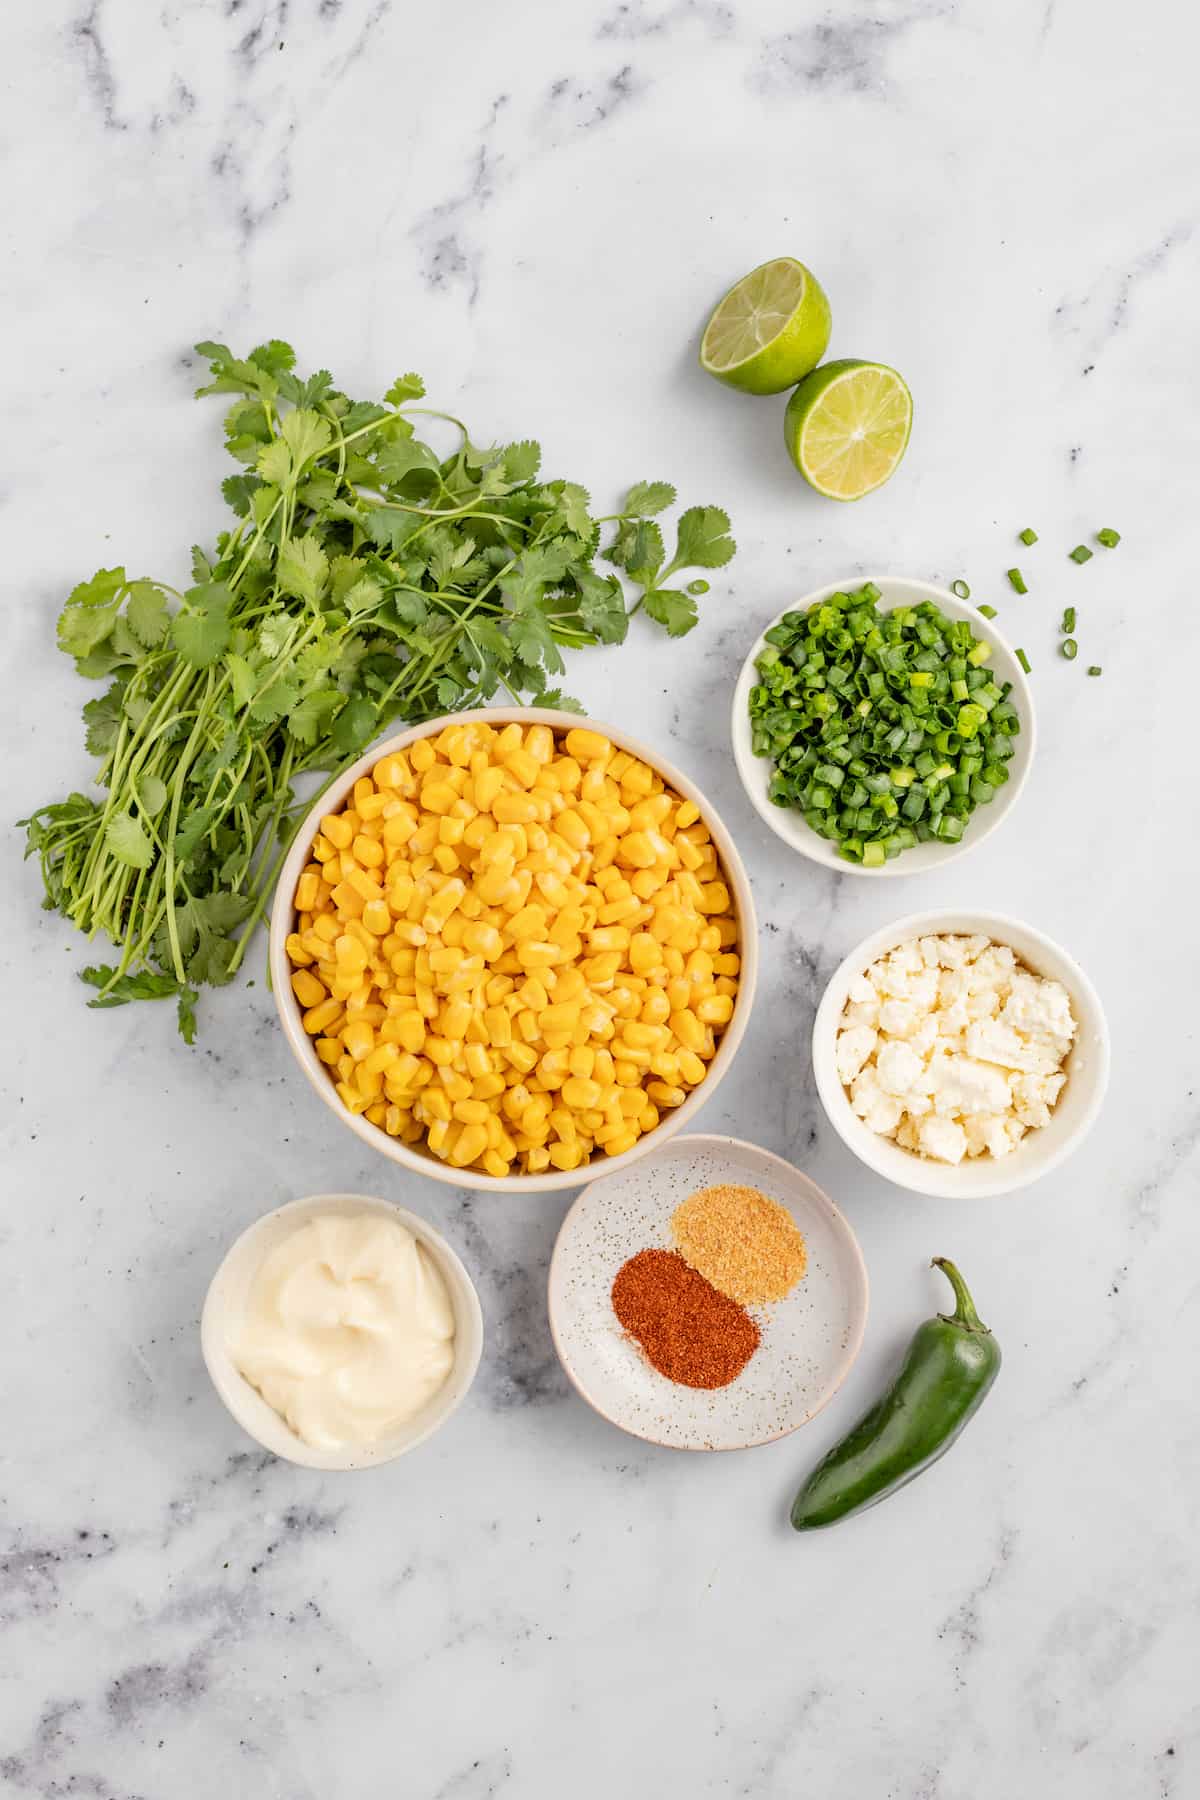 Ingredients for Mexican street corn dip.